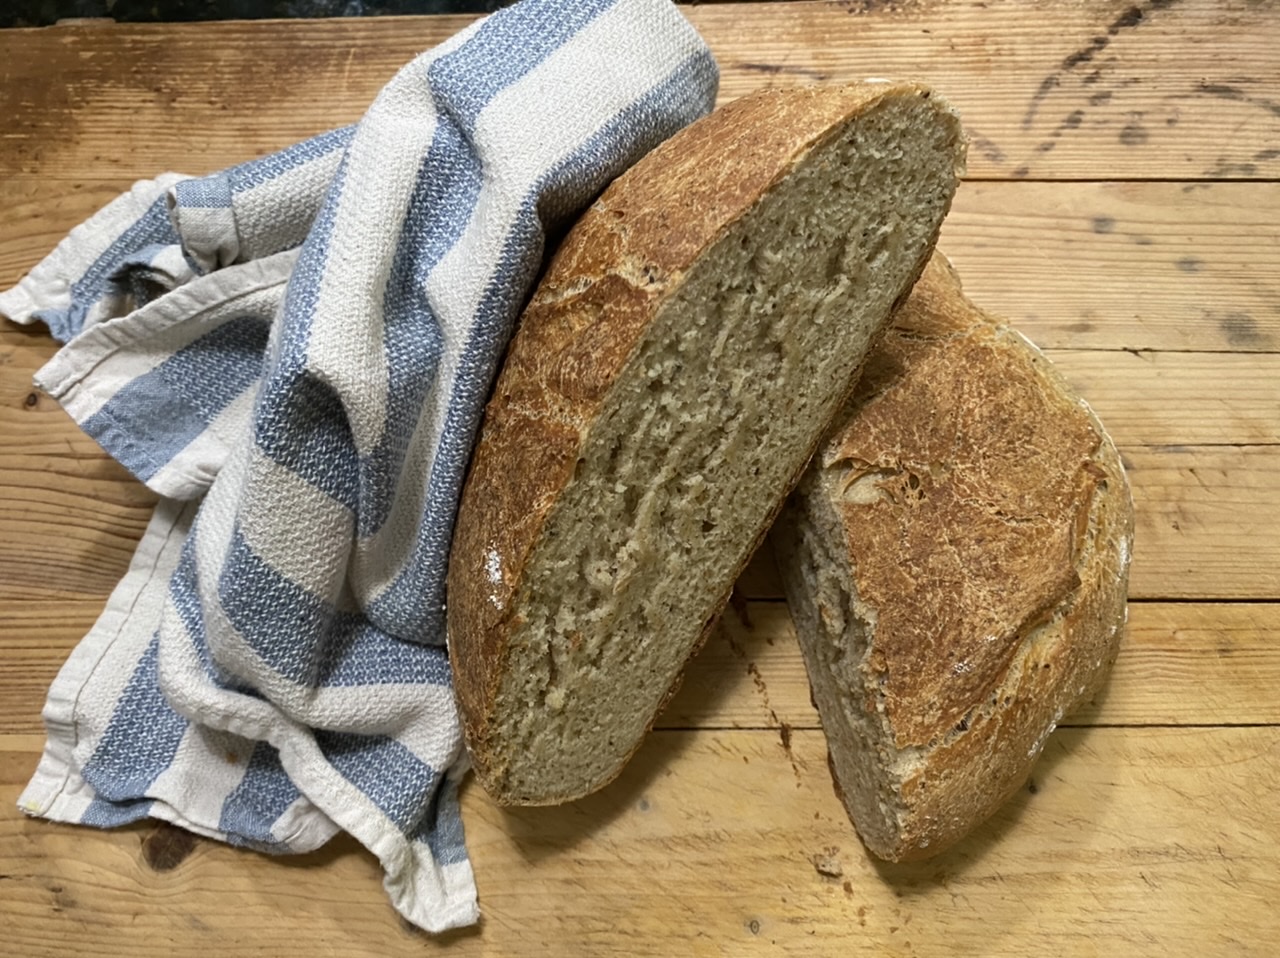 200: WHOLEMEAL SOURDOUGH BREAD - Stone Baked OR in a Dutch Oven